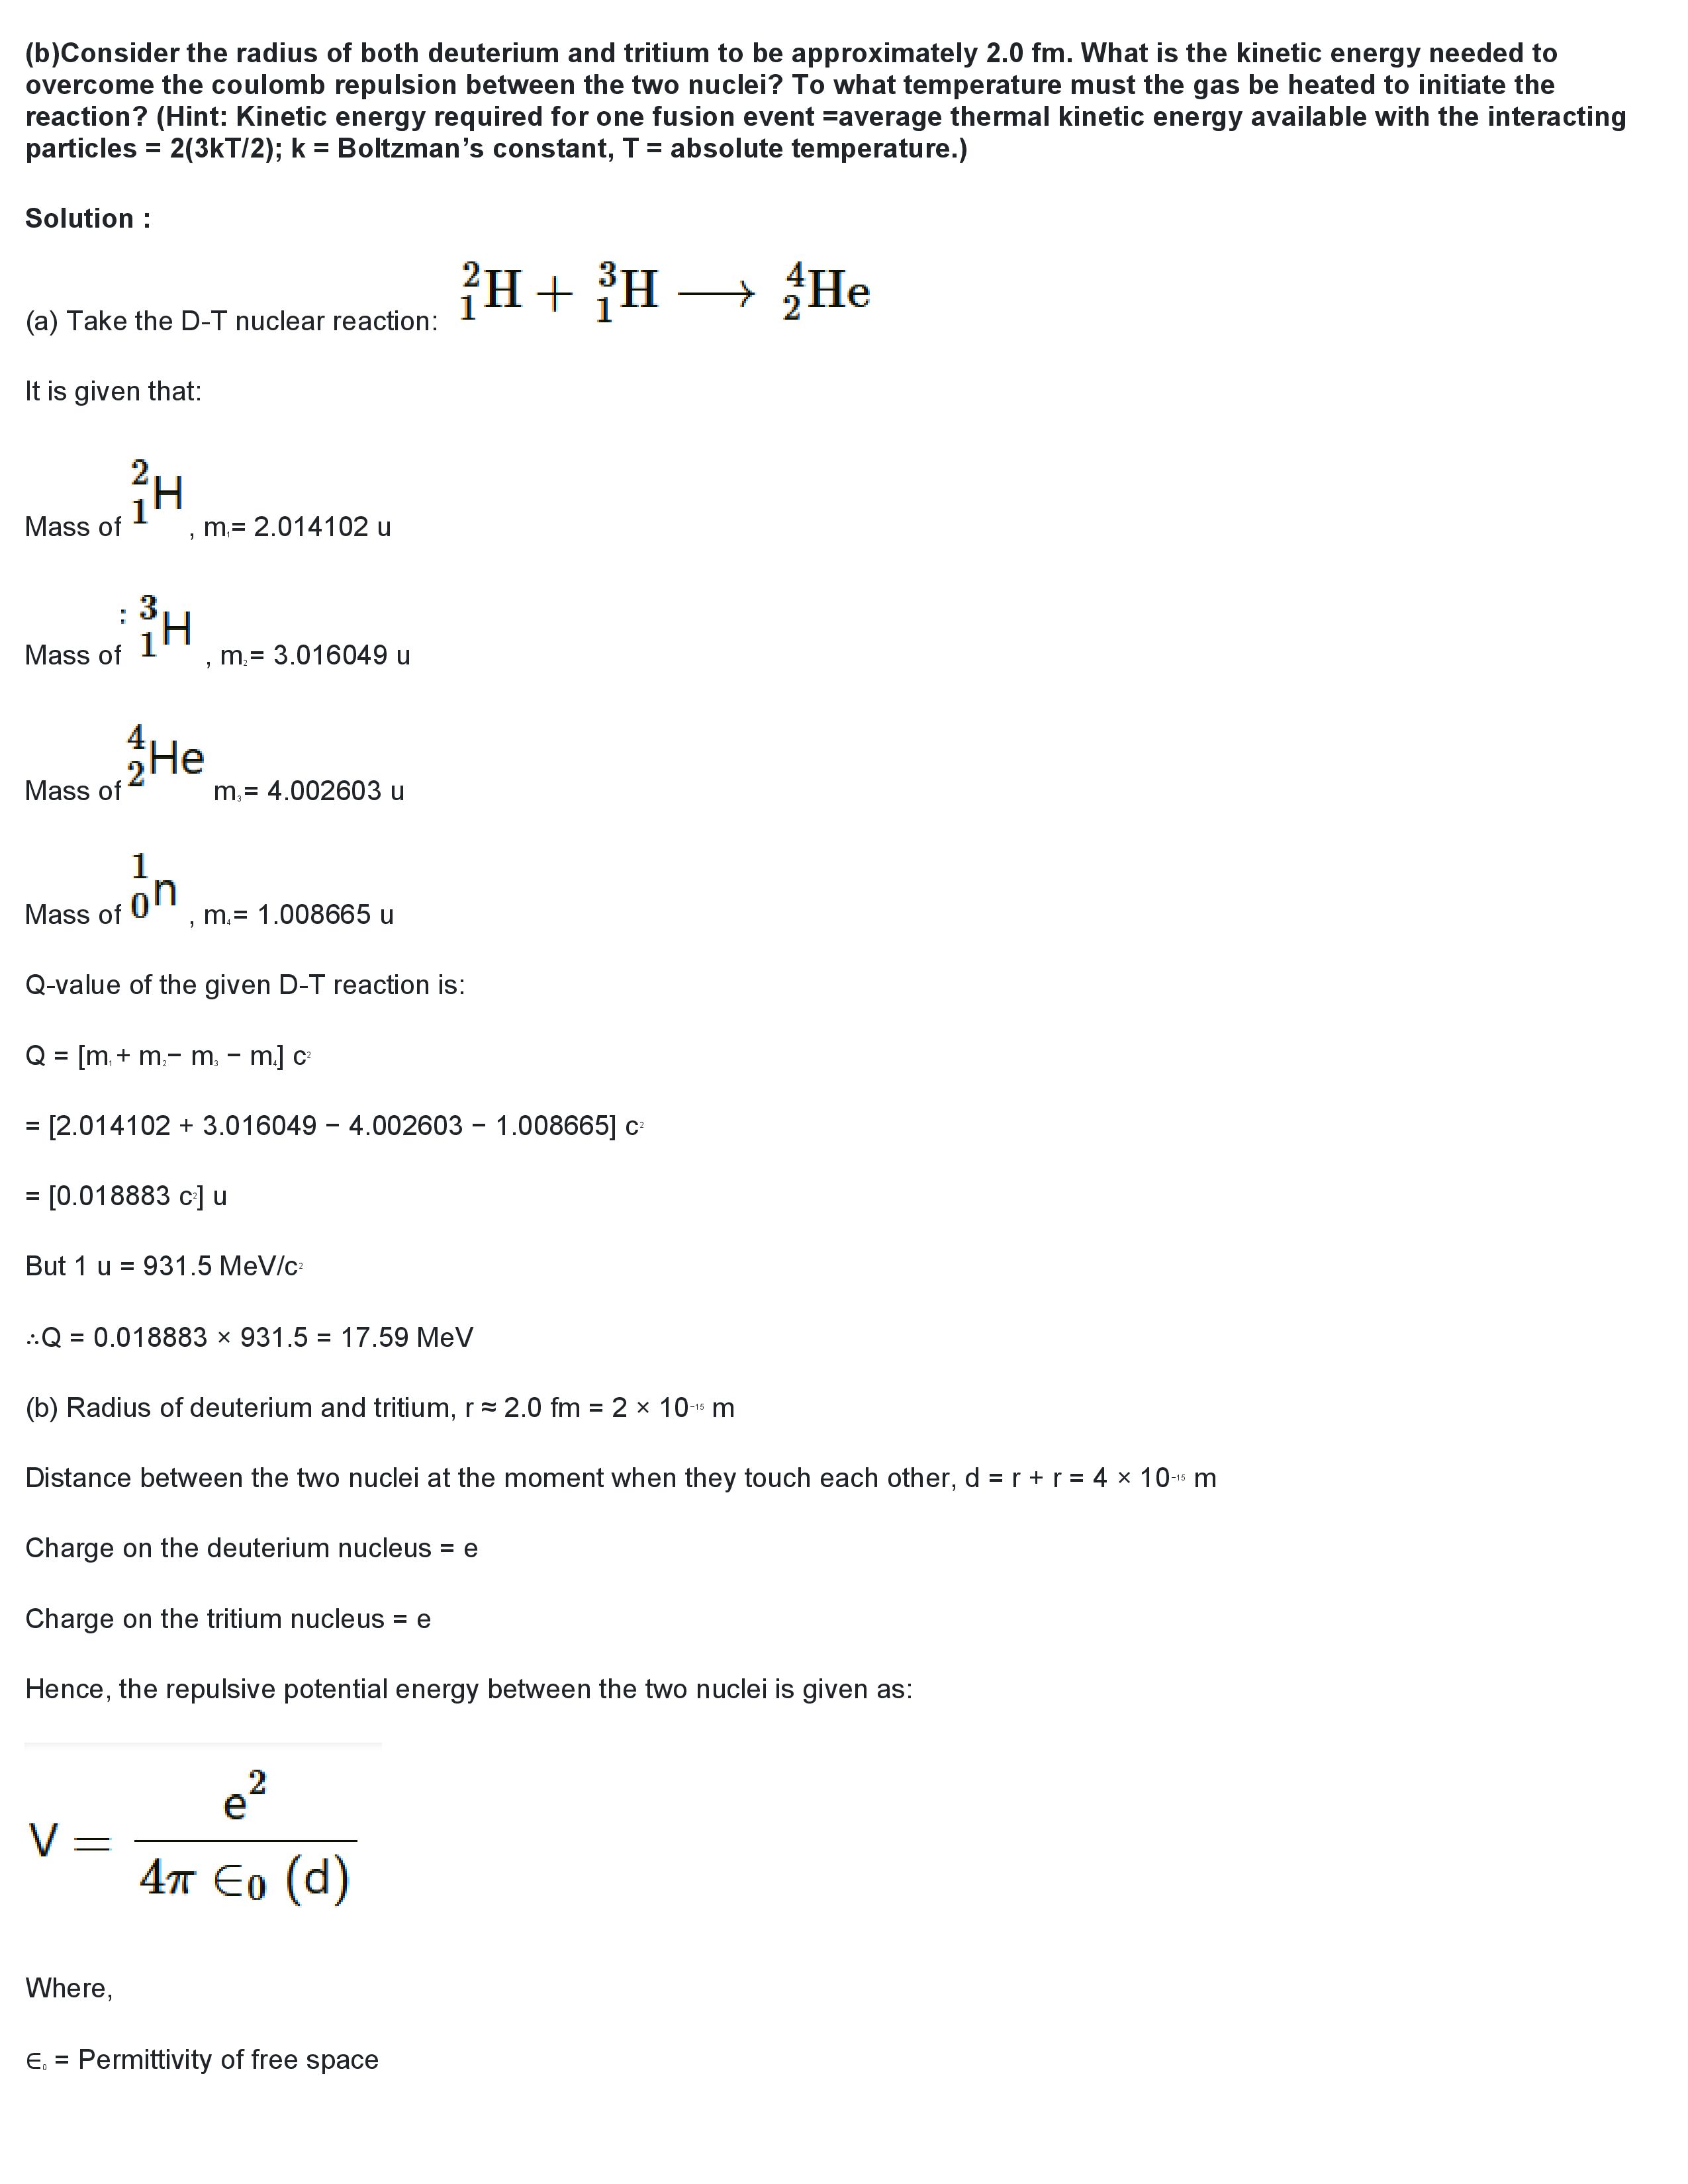 ""NCERT-Solutions-Class-12-Physics-Chapter-13-Nuclei-25